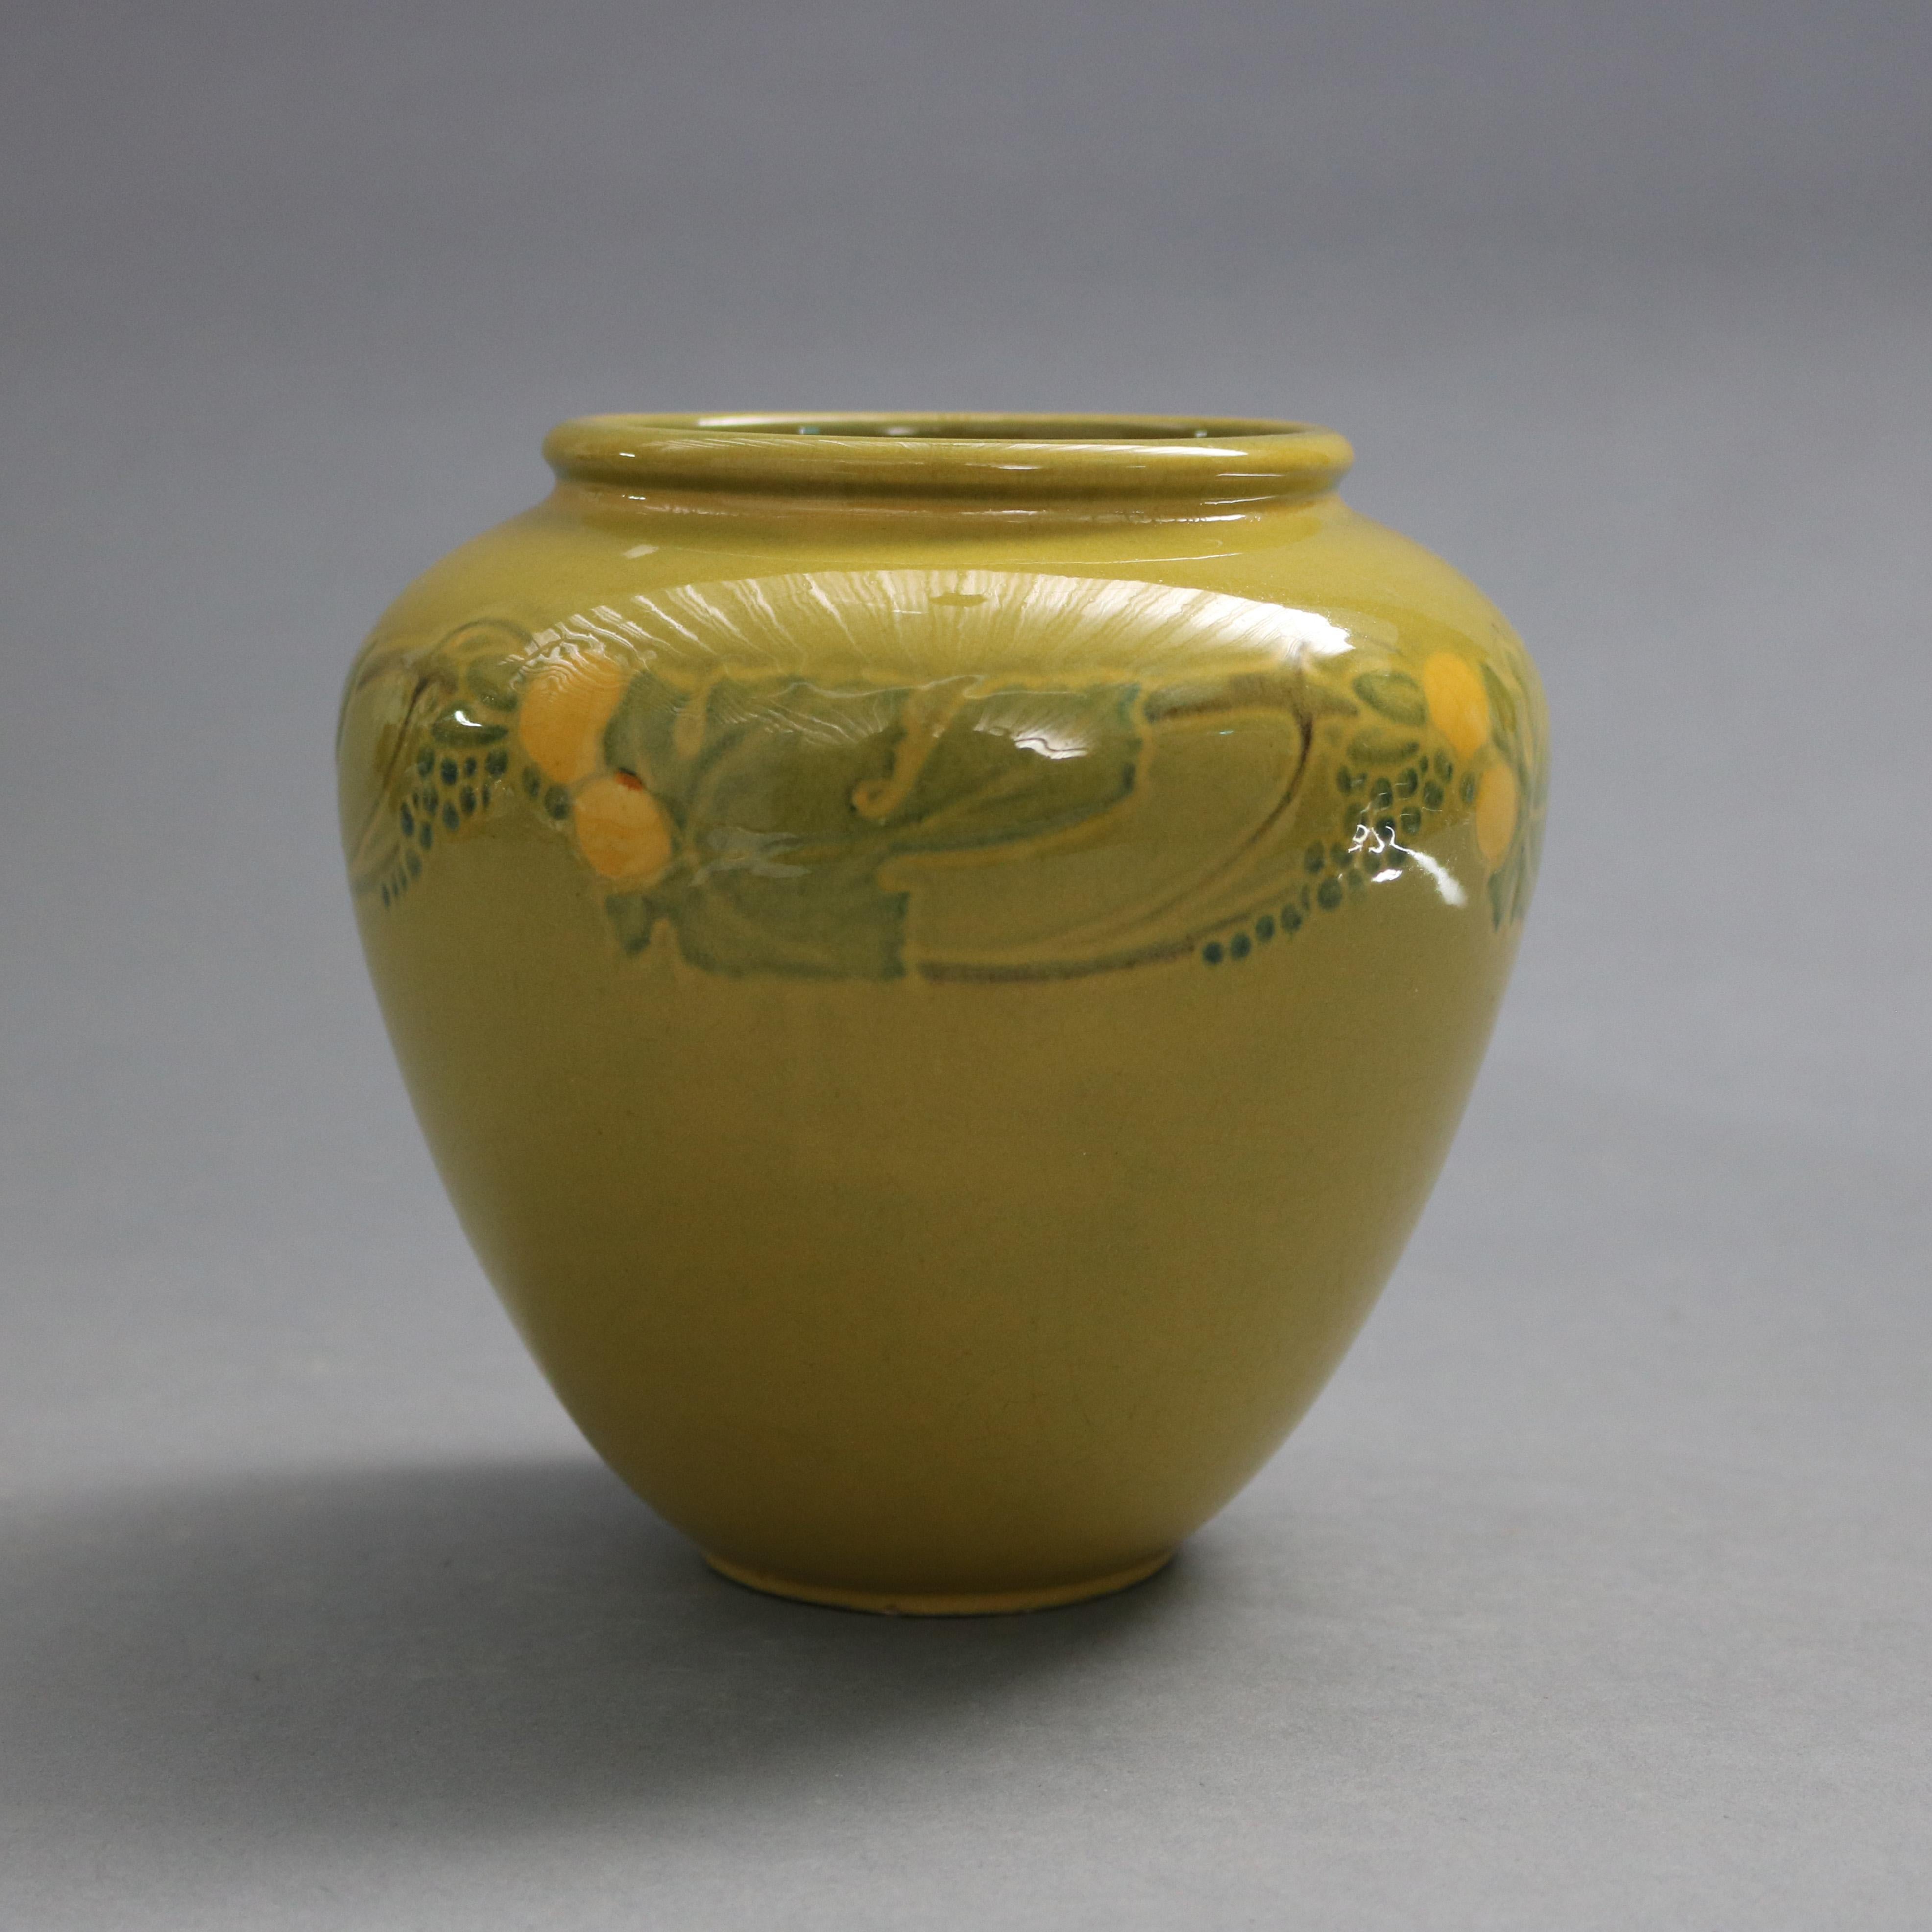 An antique and early Arts & Crafts vase by Roseville offers art pottery construction with floral and foliate band in a rare experimental glaze, signed and numbered on base as photographed, 1920-1930

Measures: 6.25